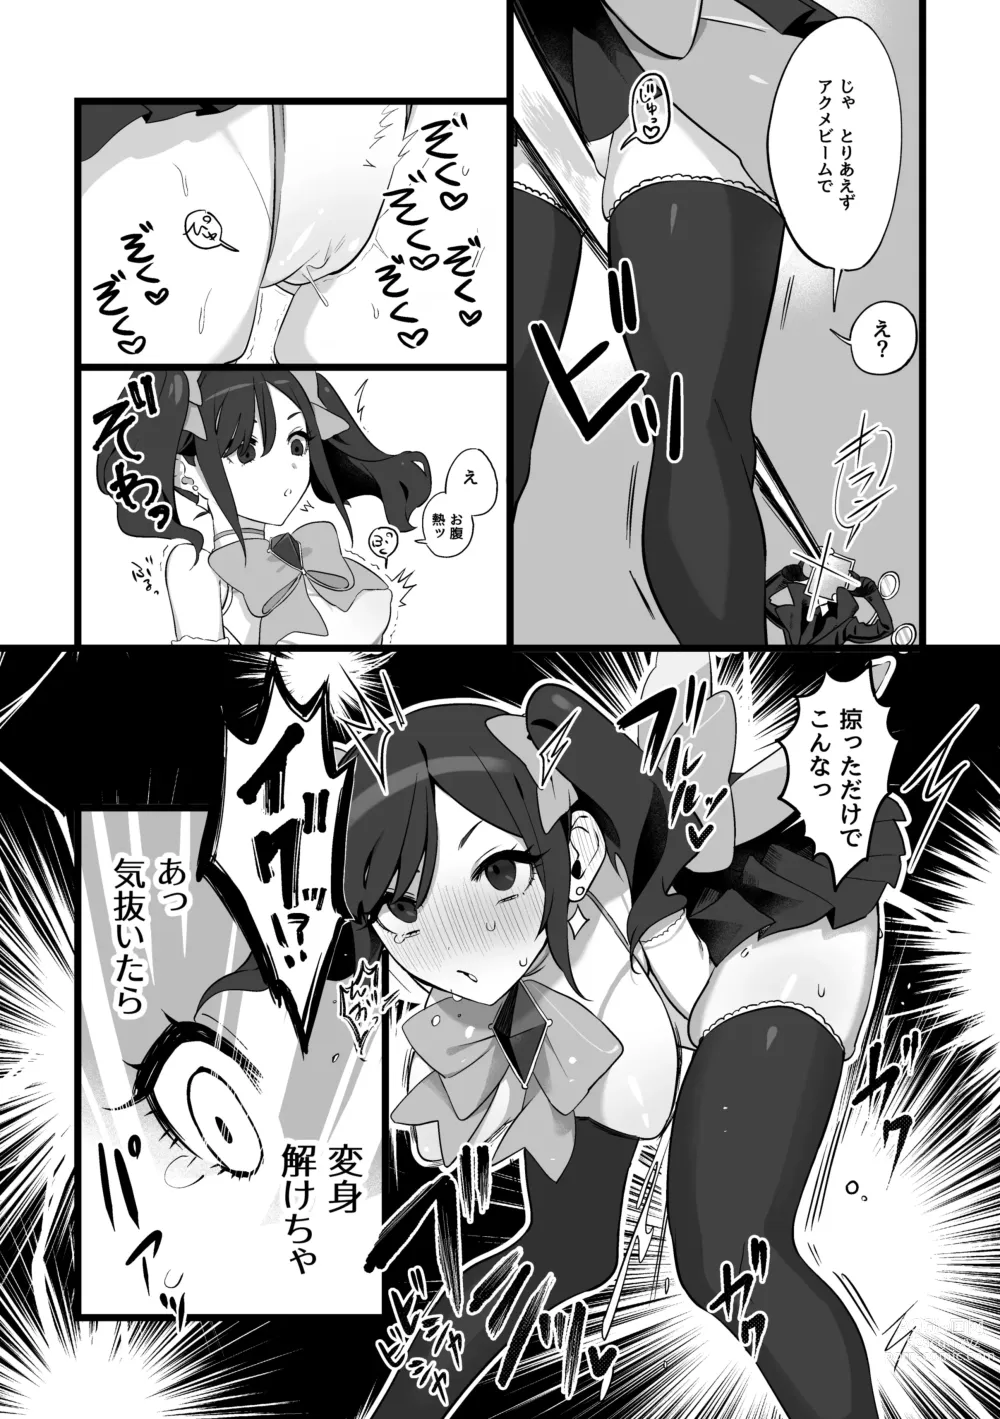 Page 2 of doujinshi Defeated Magical girl